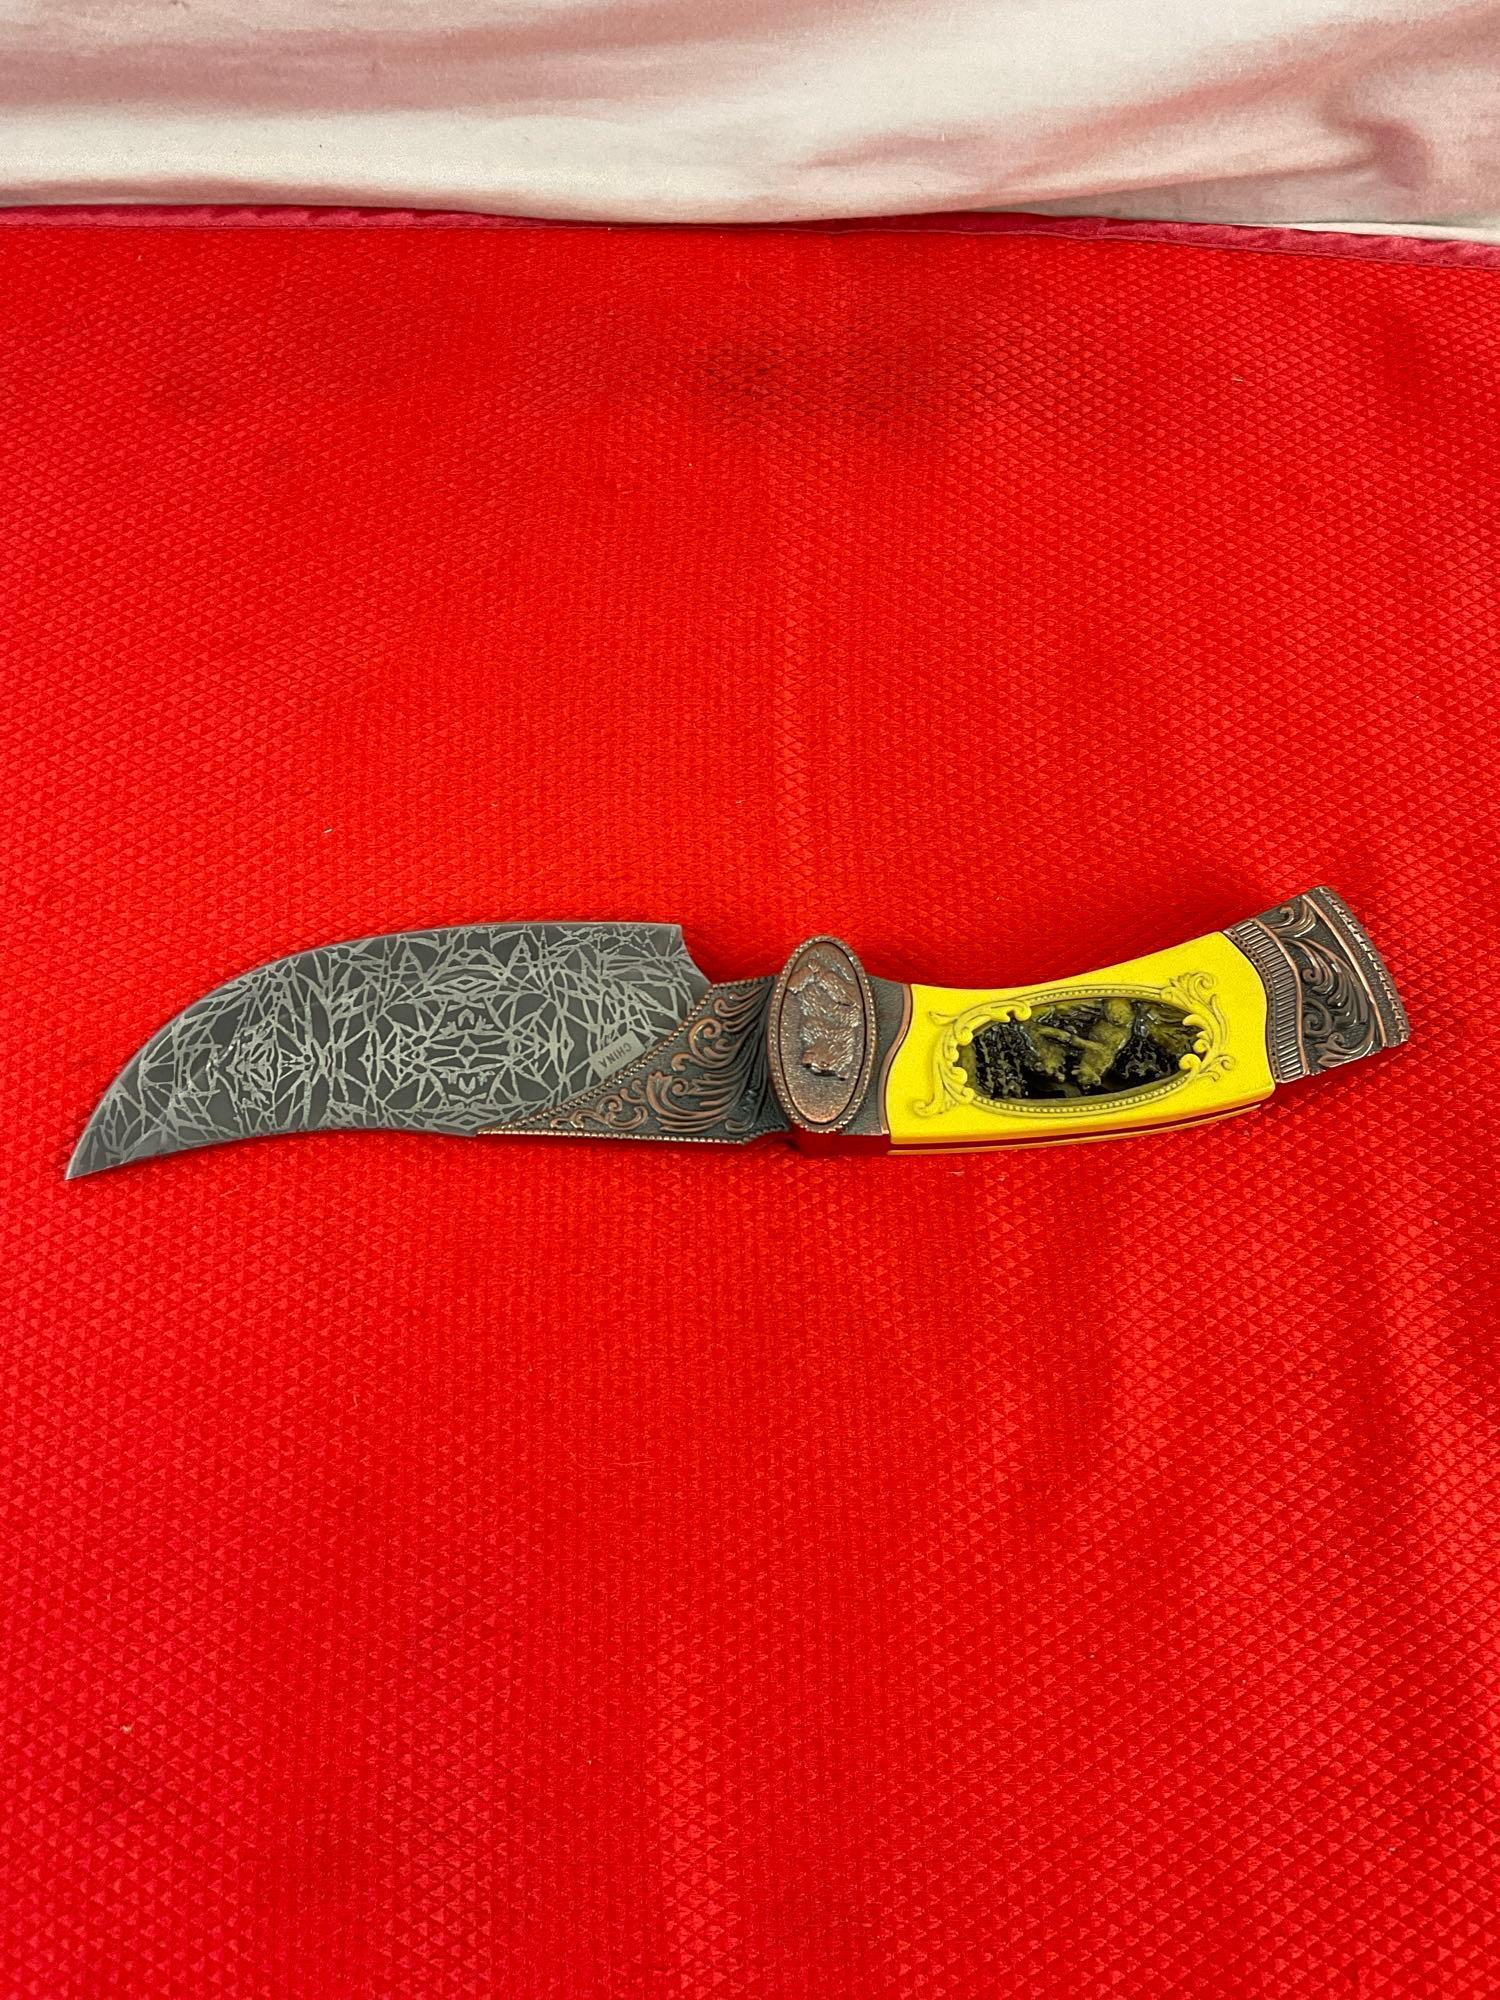 Stainless Steel 5" Fixed Blade Knife w/ Brown Bears Carved Resin Handle & Etched Blade. See pics.